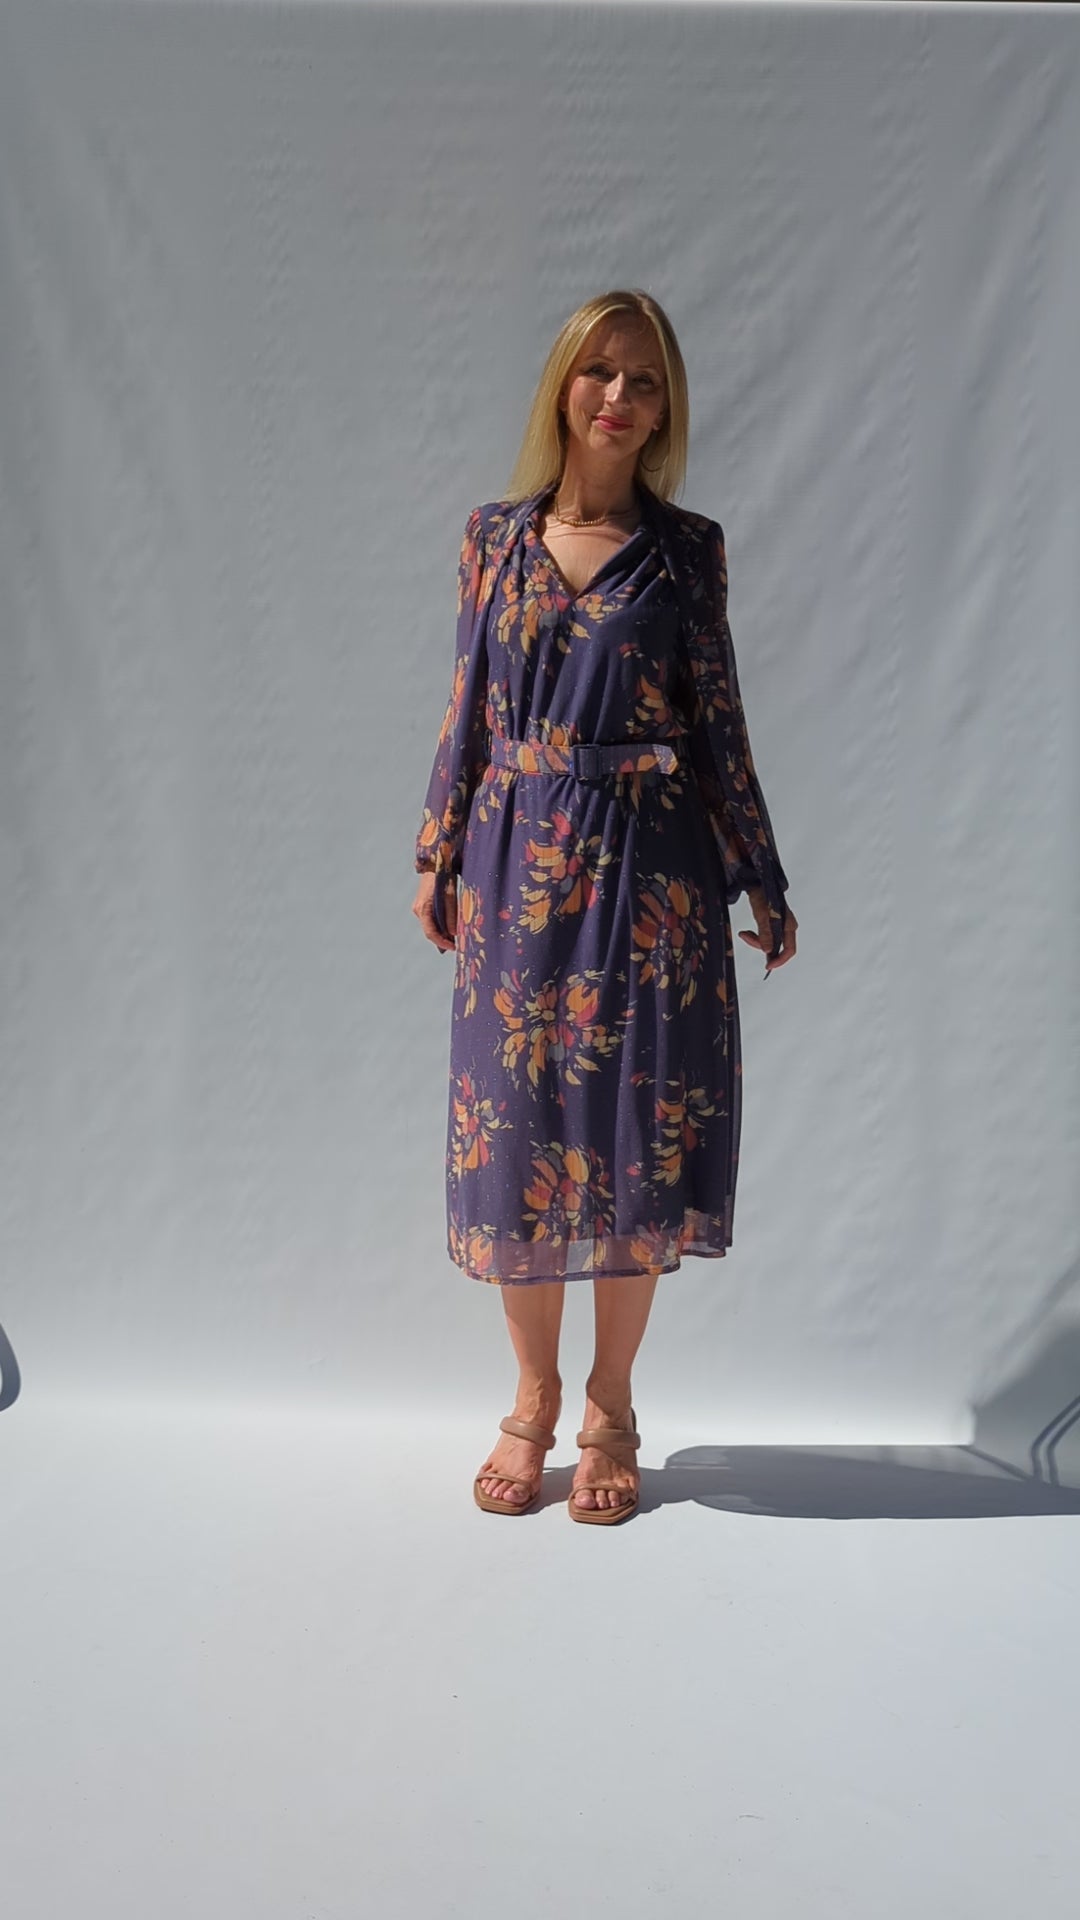 video showing vintage floral 80s dress in mauve with an abstract floral pattern of peaches and lilac